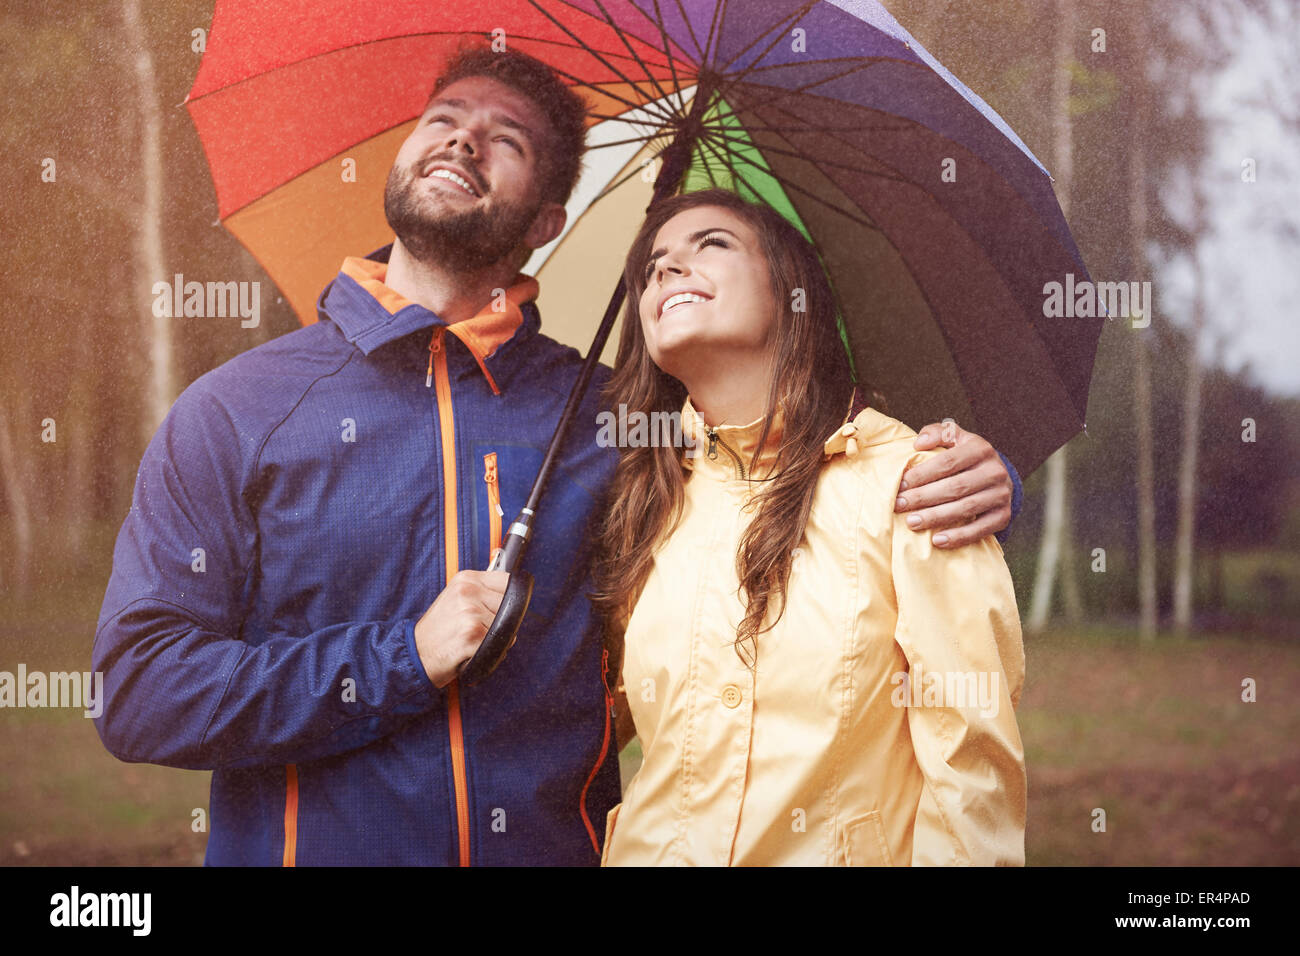 Looking for a sun in rainy day. Debica, Poland Stock Photo